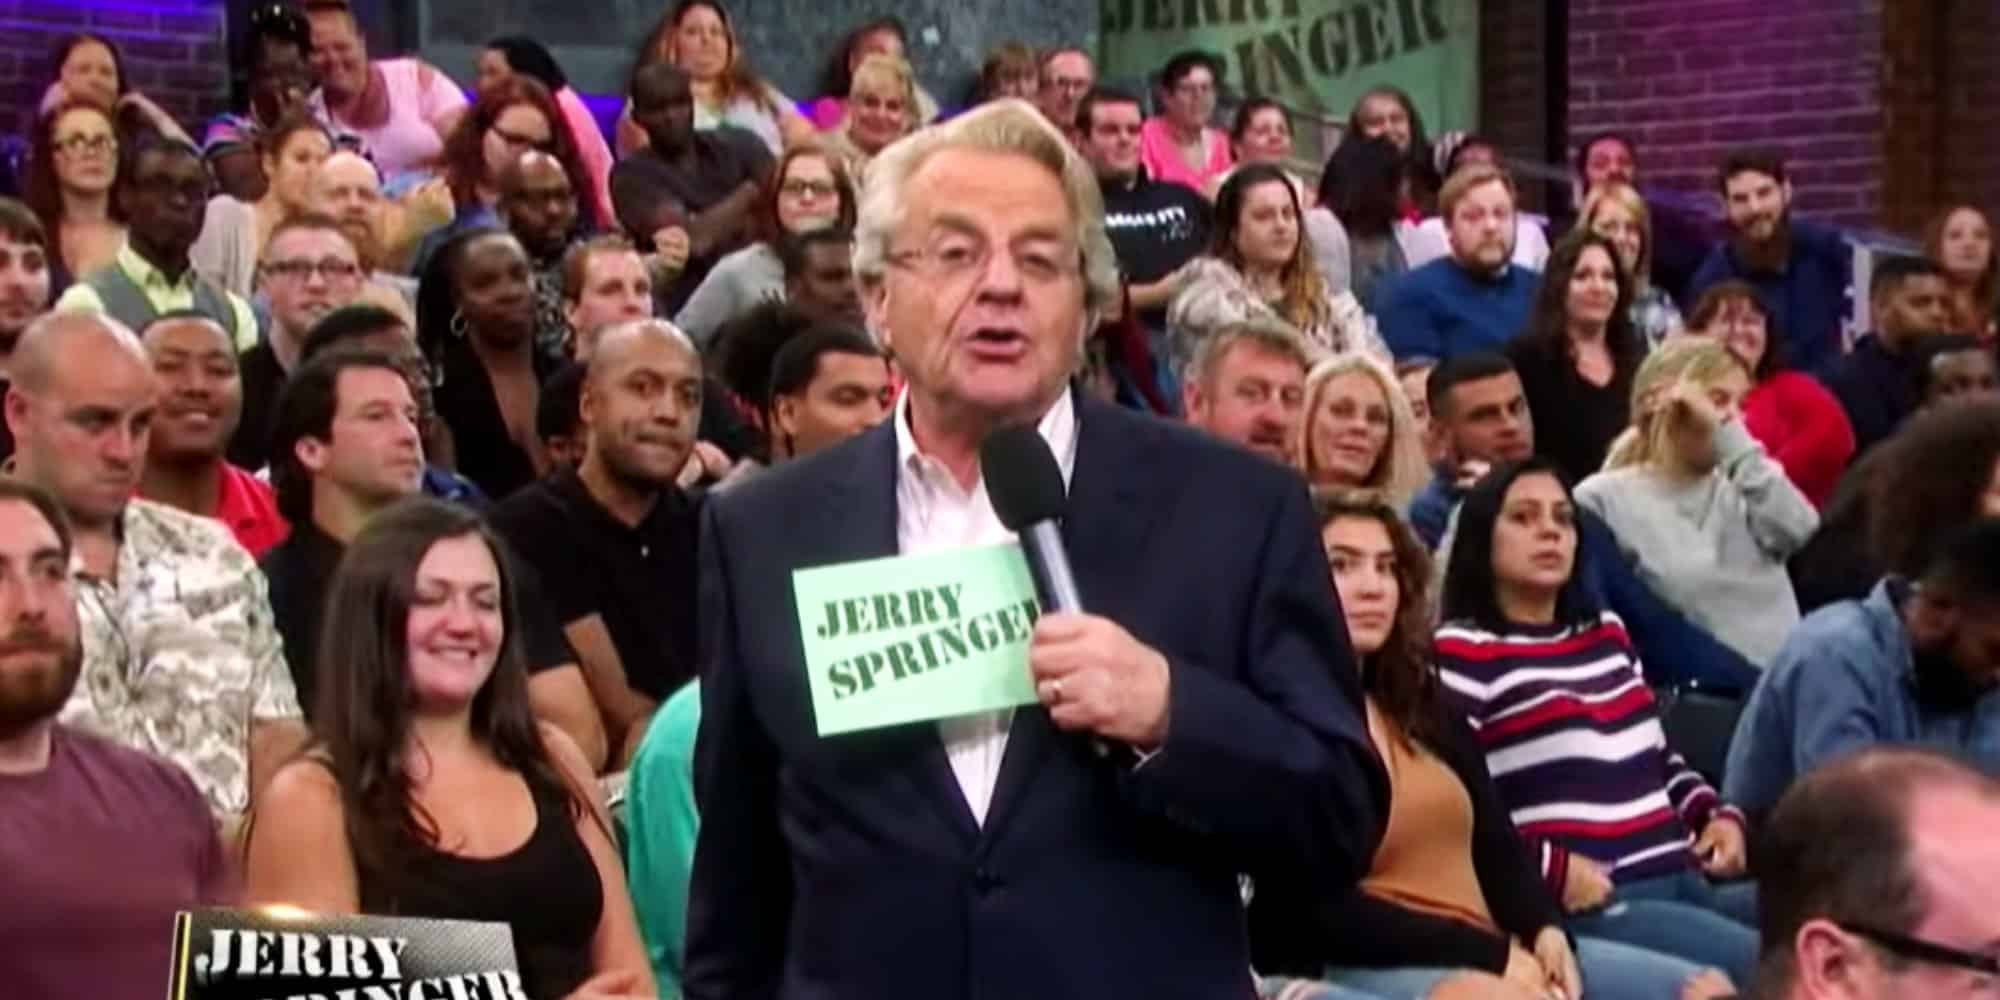 Jerry Springer Controversy